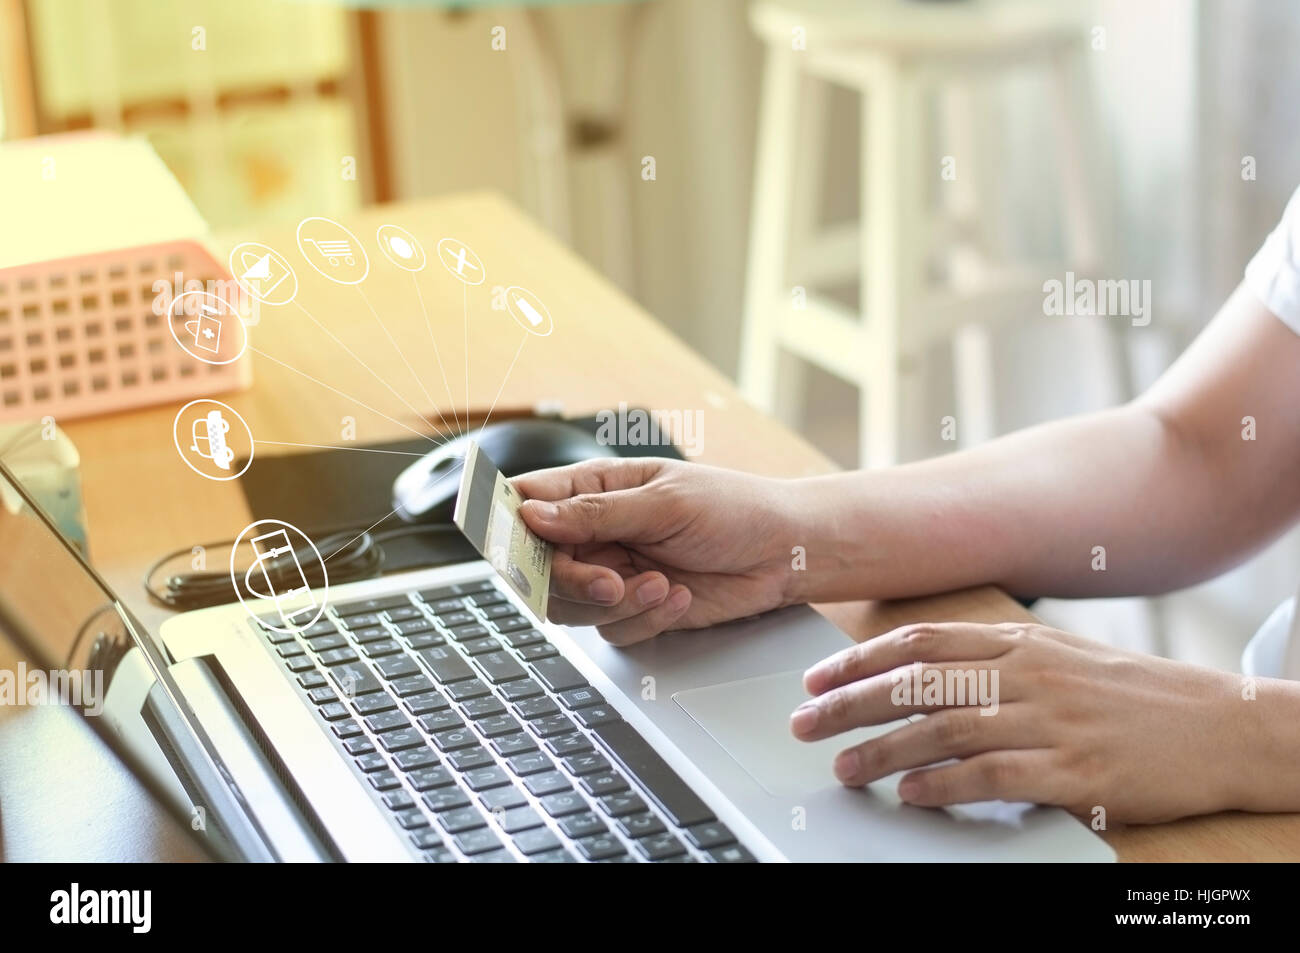 Hand holding card and using laptop for on-line shopping goods and payment service. Stock Photo